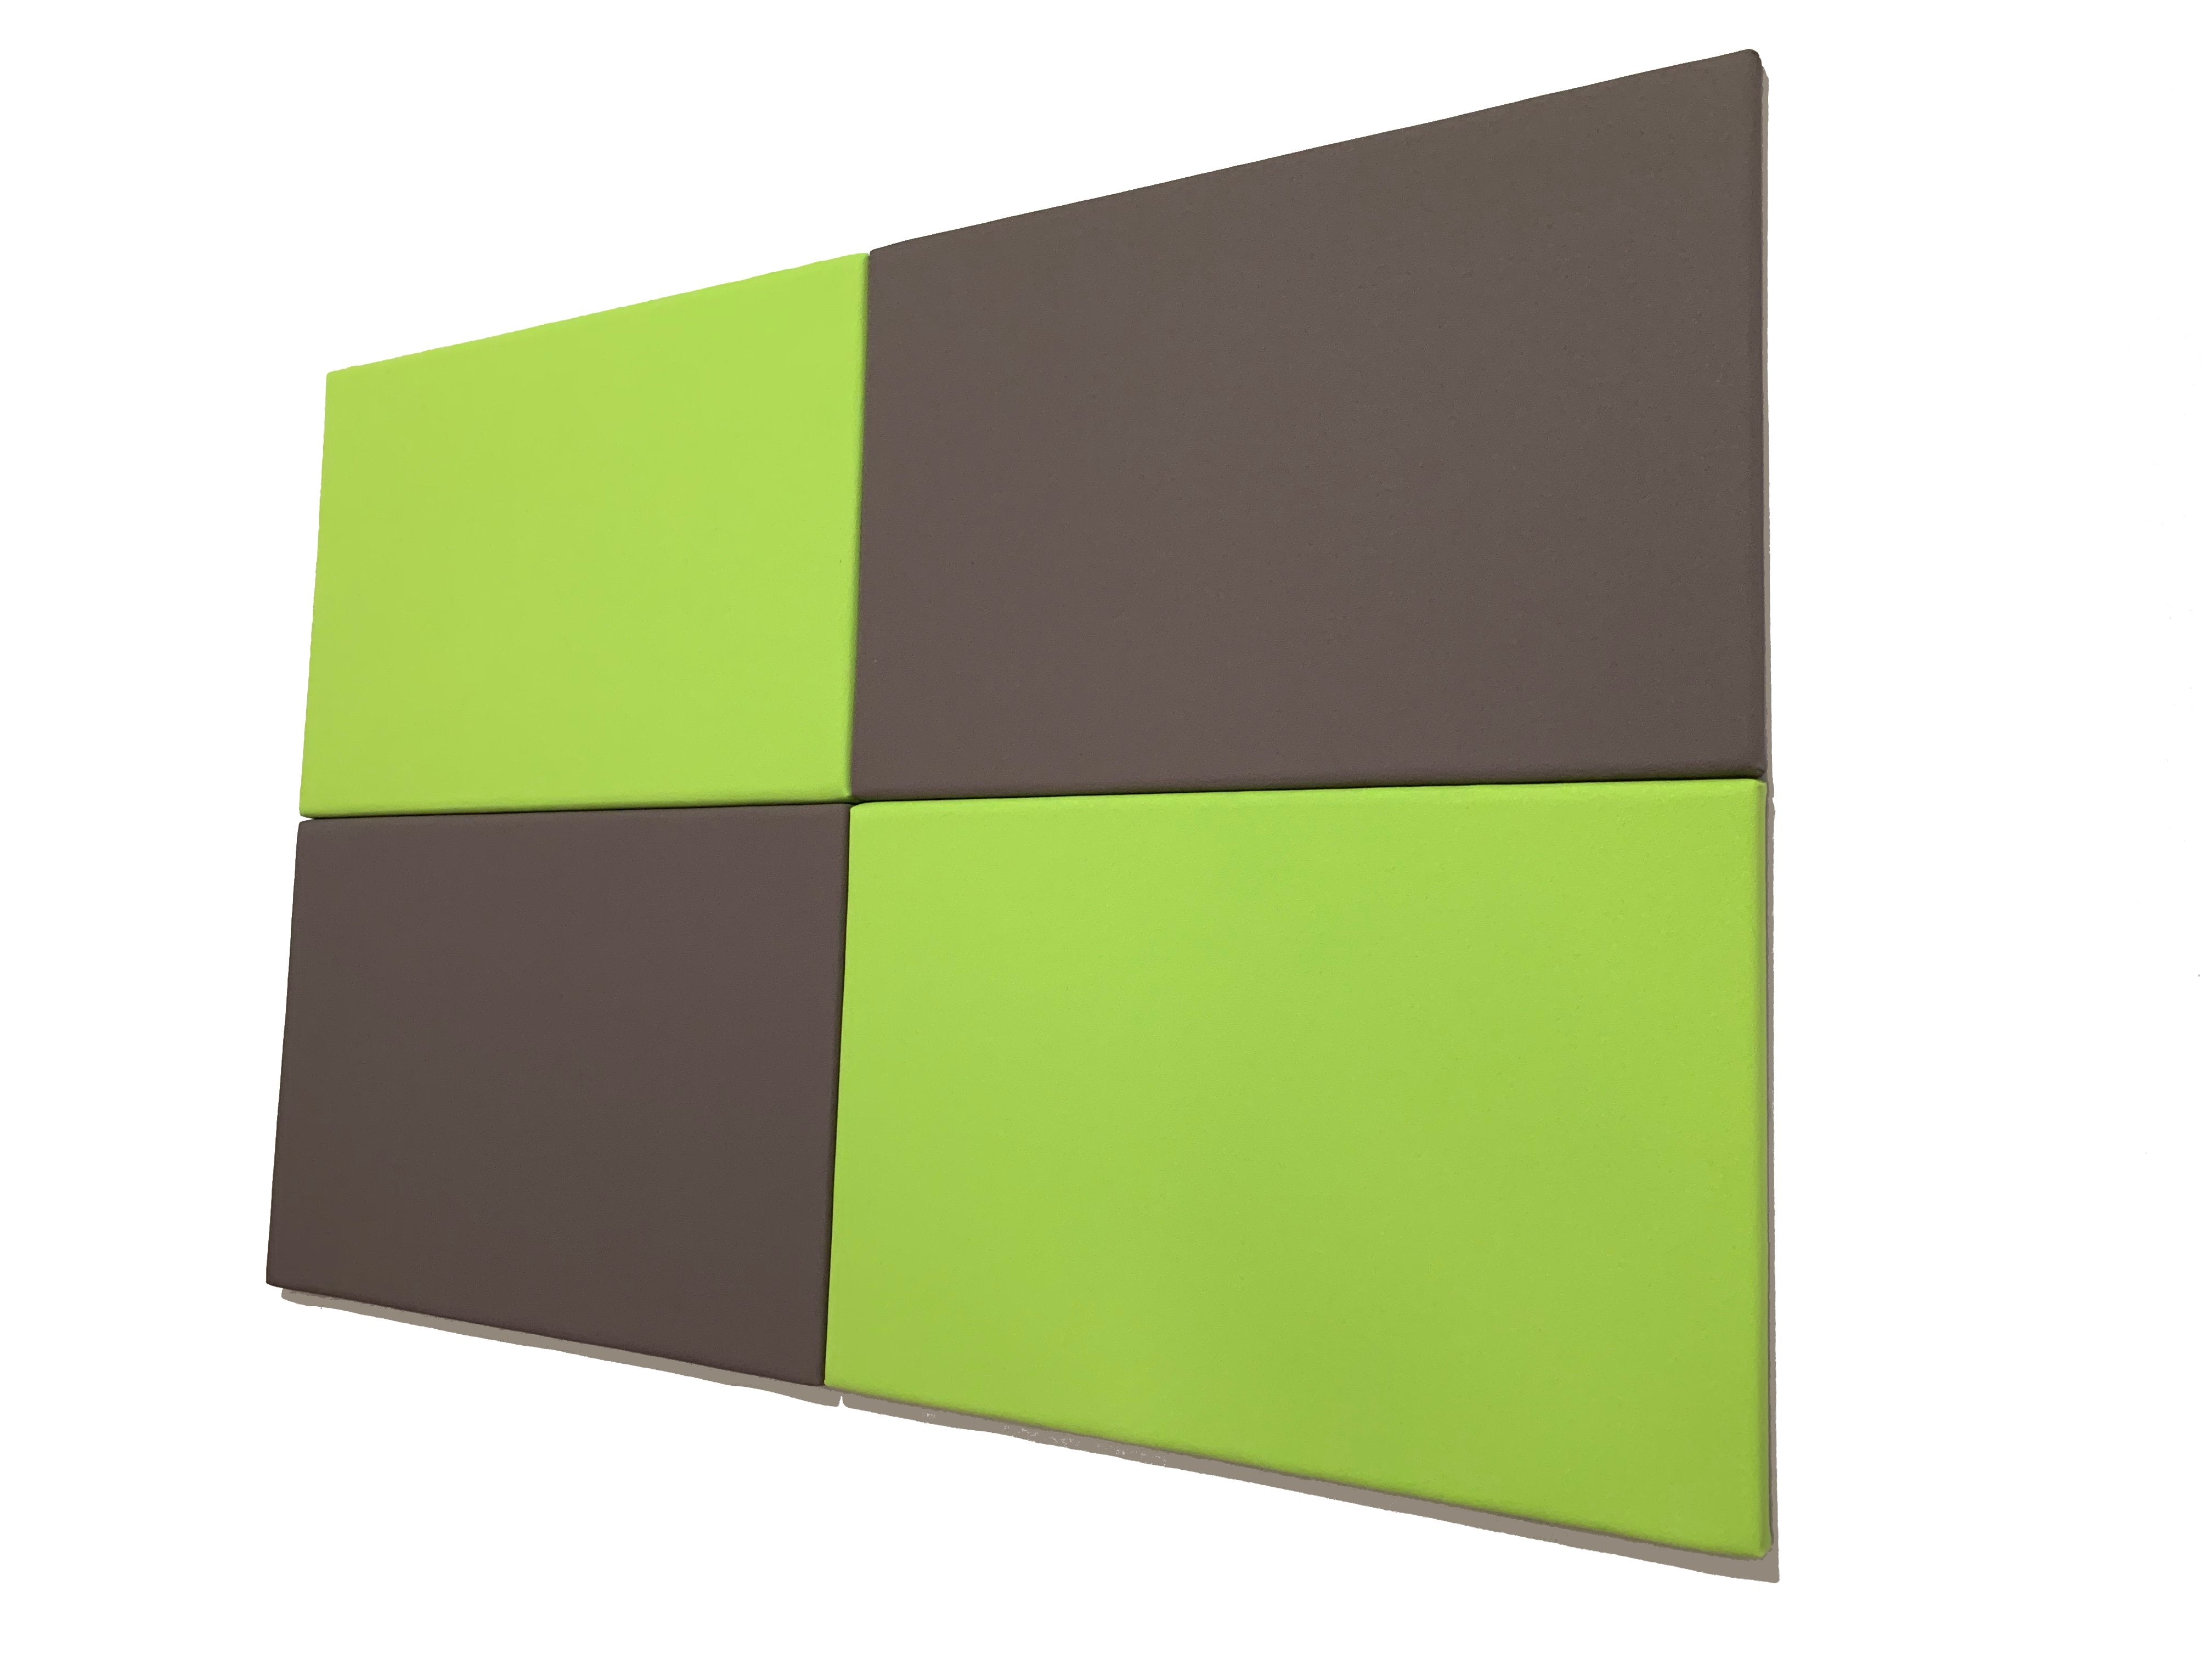 2" SoundControl Wall Mounted Acoustic Panel 2ft by 3ft - Advanced Acoustics